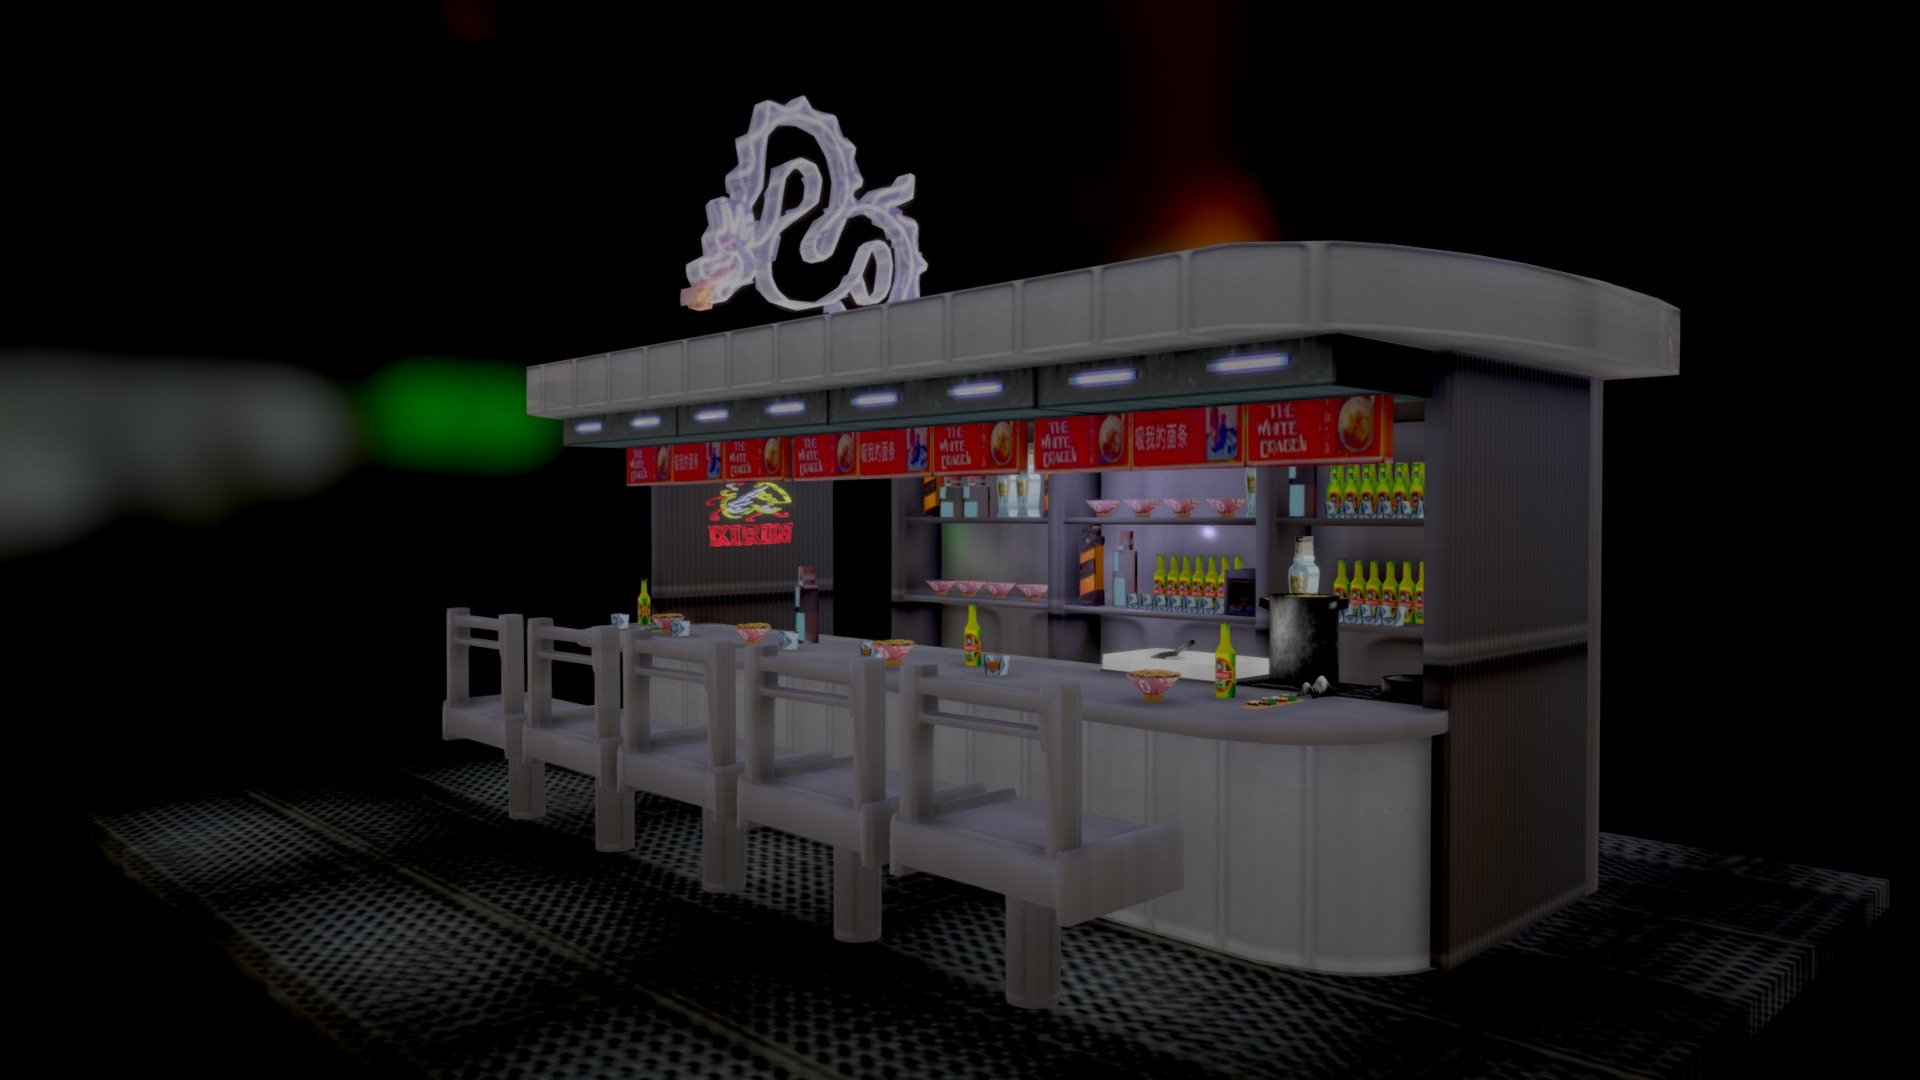 White Dragon Noodle Bar Blade Runner.
V2- rounded some corners and added some detail.
V3- flipped sign the way it must have been in movie.  More detail. Pots and pans.
Made a Mozilla Hubs site.  Some of the transparency effects don't work but overall ok.  Link below. Works best in Firefox on PC

https://hubs.mozilla.com/scenes/STXjrn3  (improved 9.7.20) - White Dragon Noodle Bar Blade Runner - Download Free 3D model by tl0615 3d model